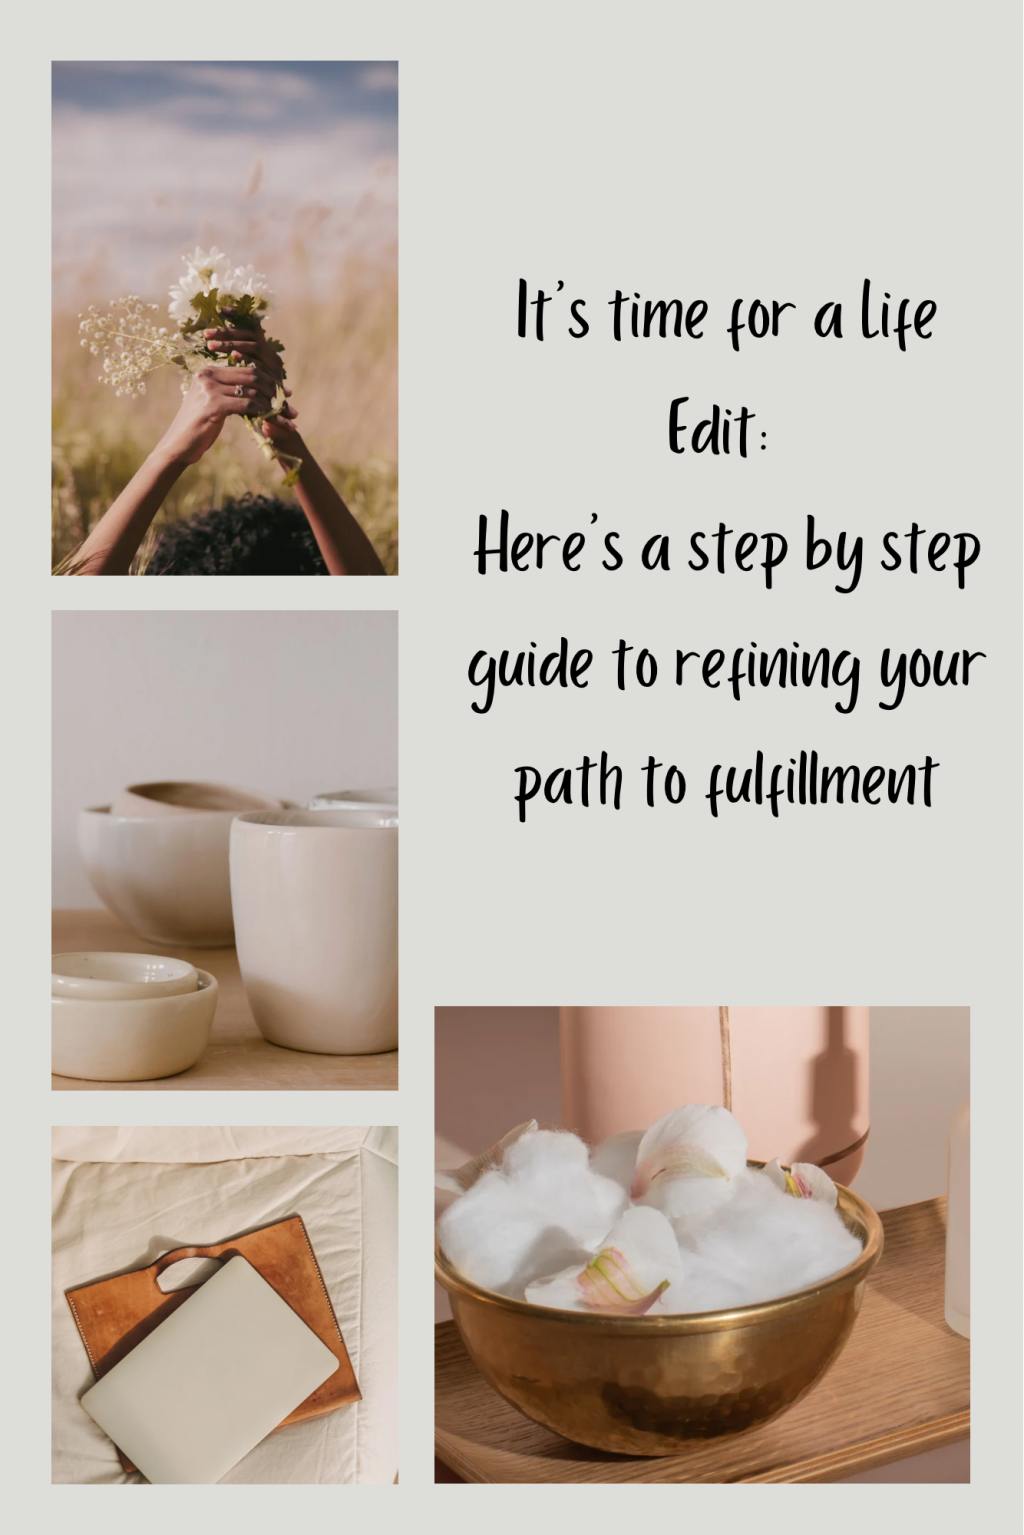 It’s time for a Life Edit: Here’s a step by step guide to refining your path to fulfillment